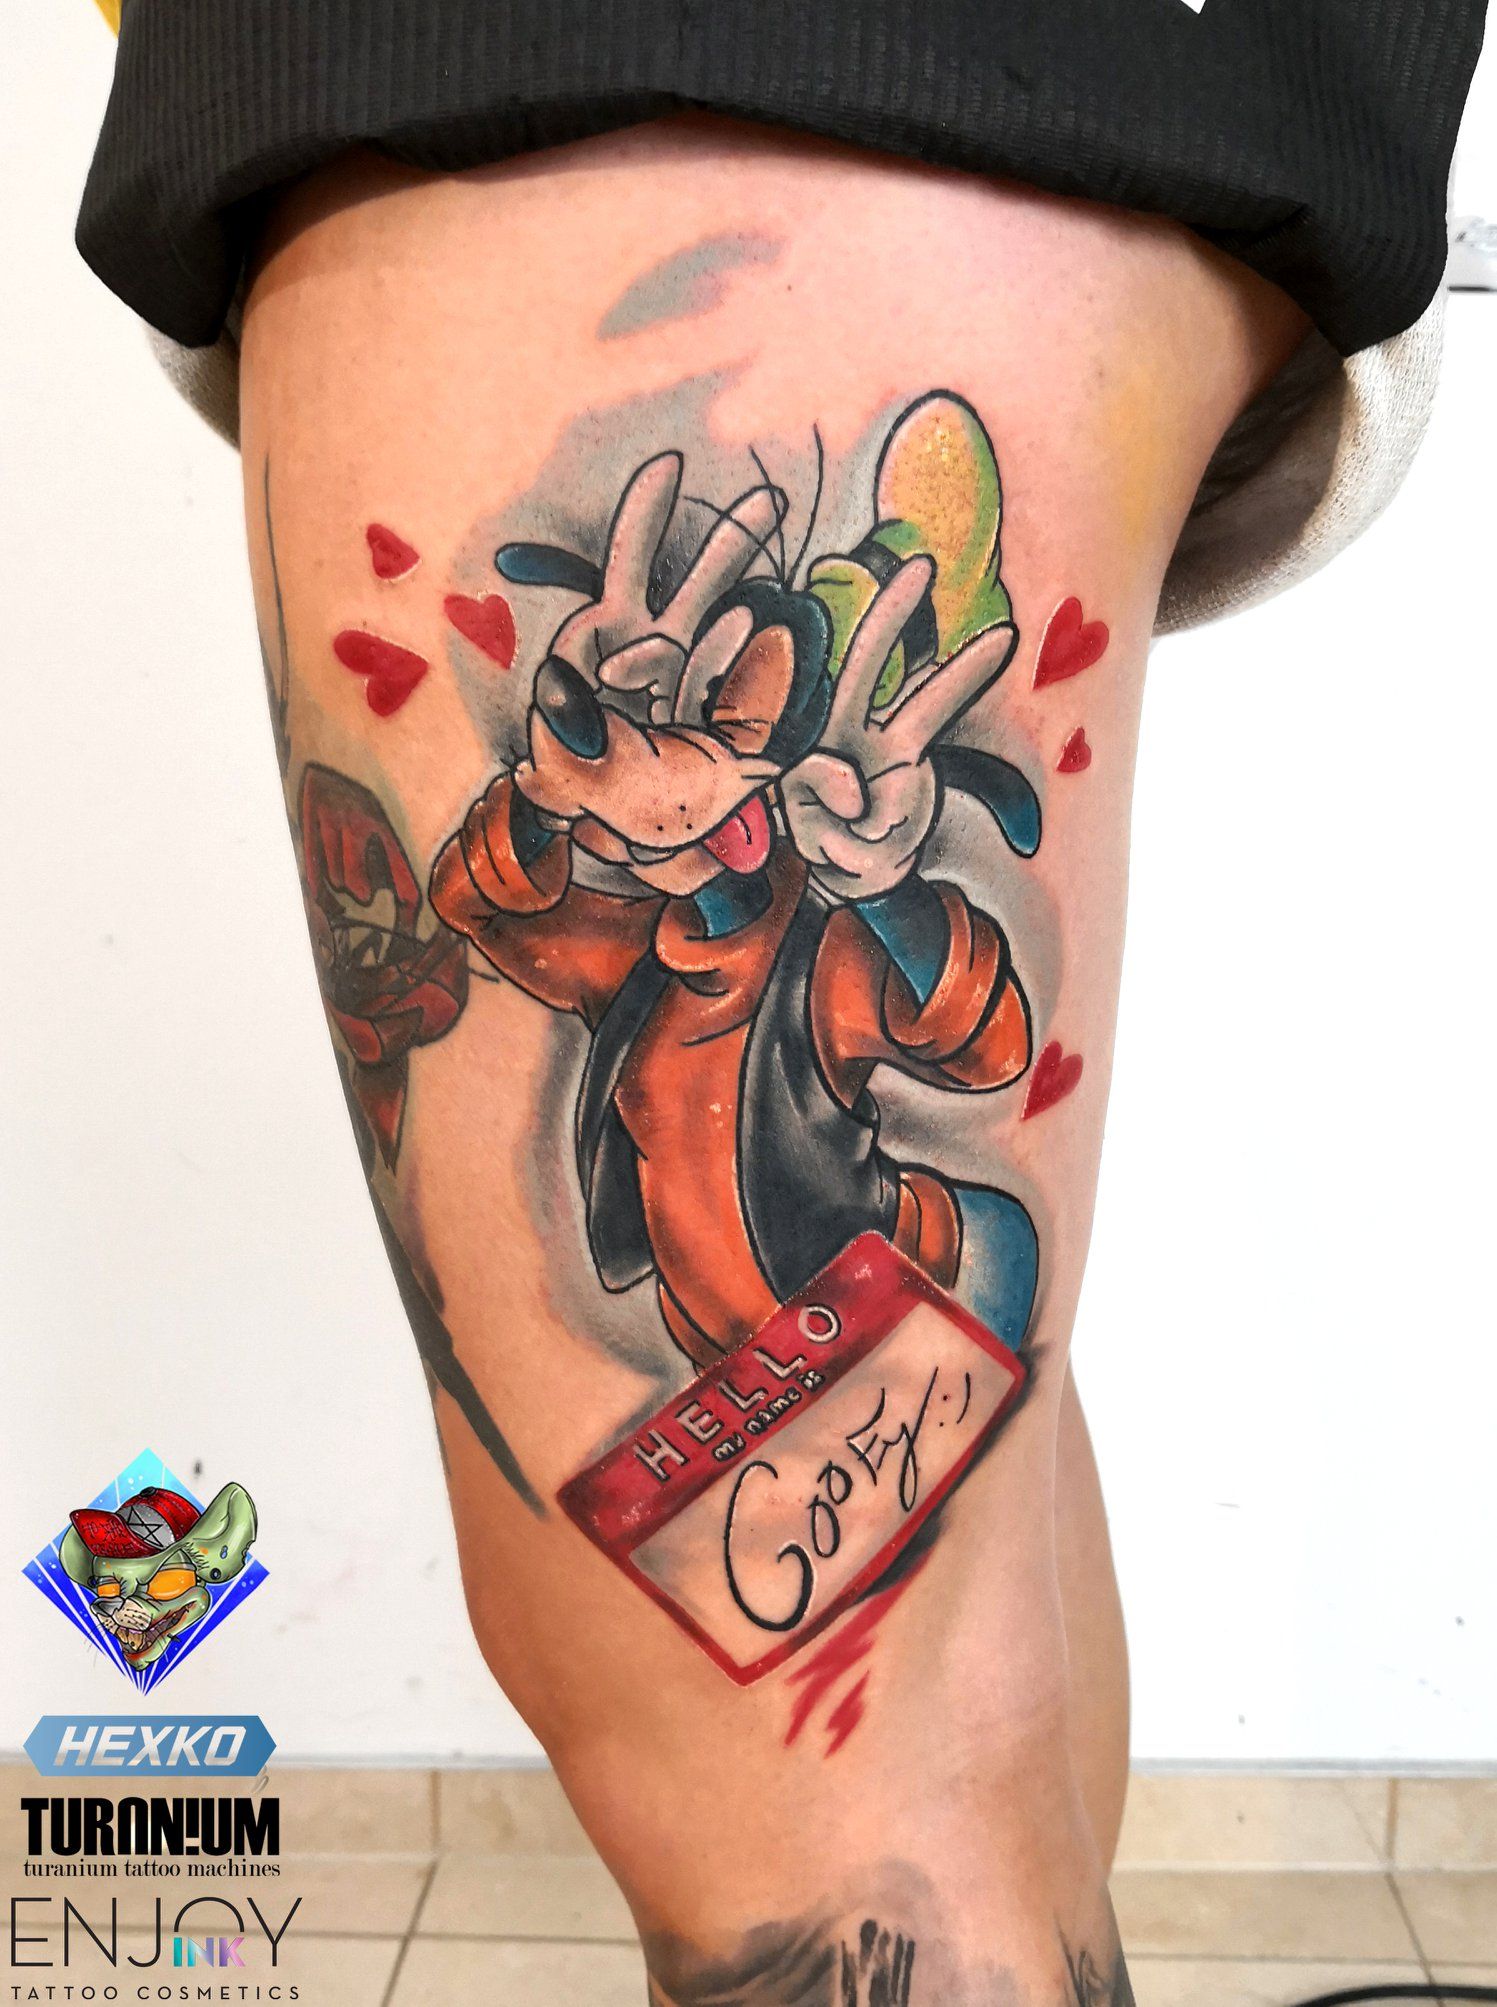 Max powerline and Roxanne from A Goofy Movie Super stoked with this  tattoo I want to tattoo more Disney and cartoon characters ink art  tattoo  By Eddie V Tattoos  Facebook